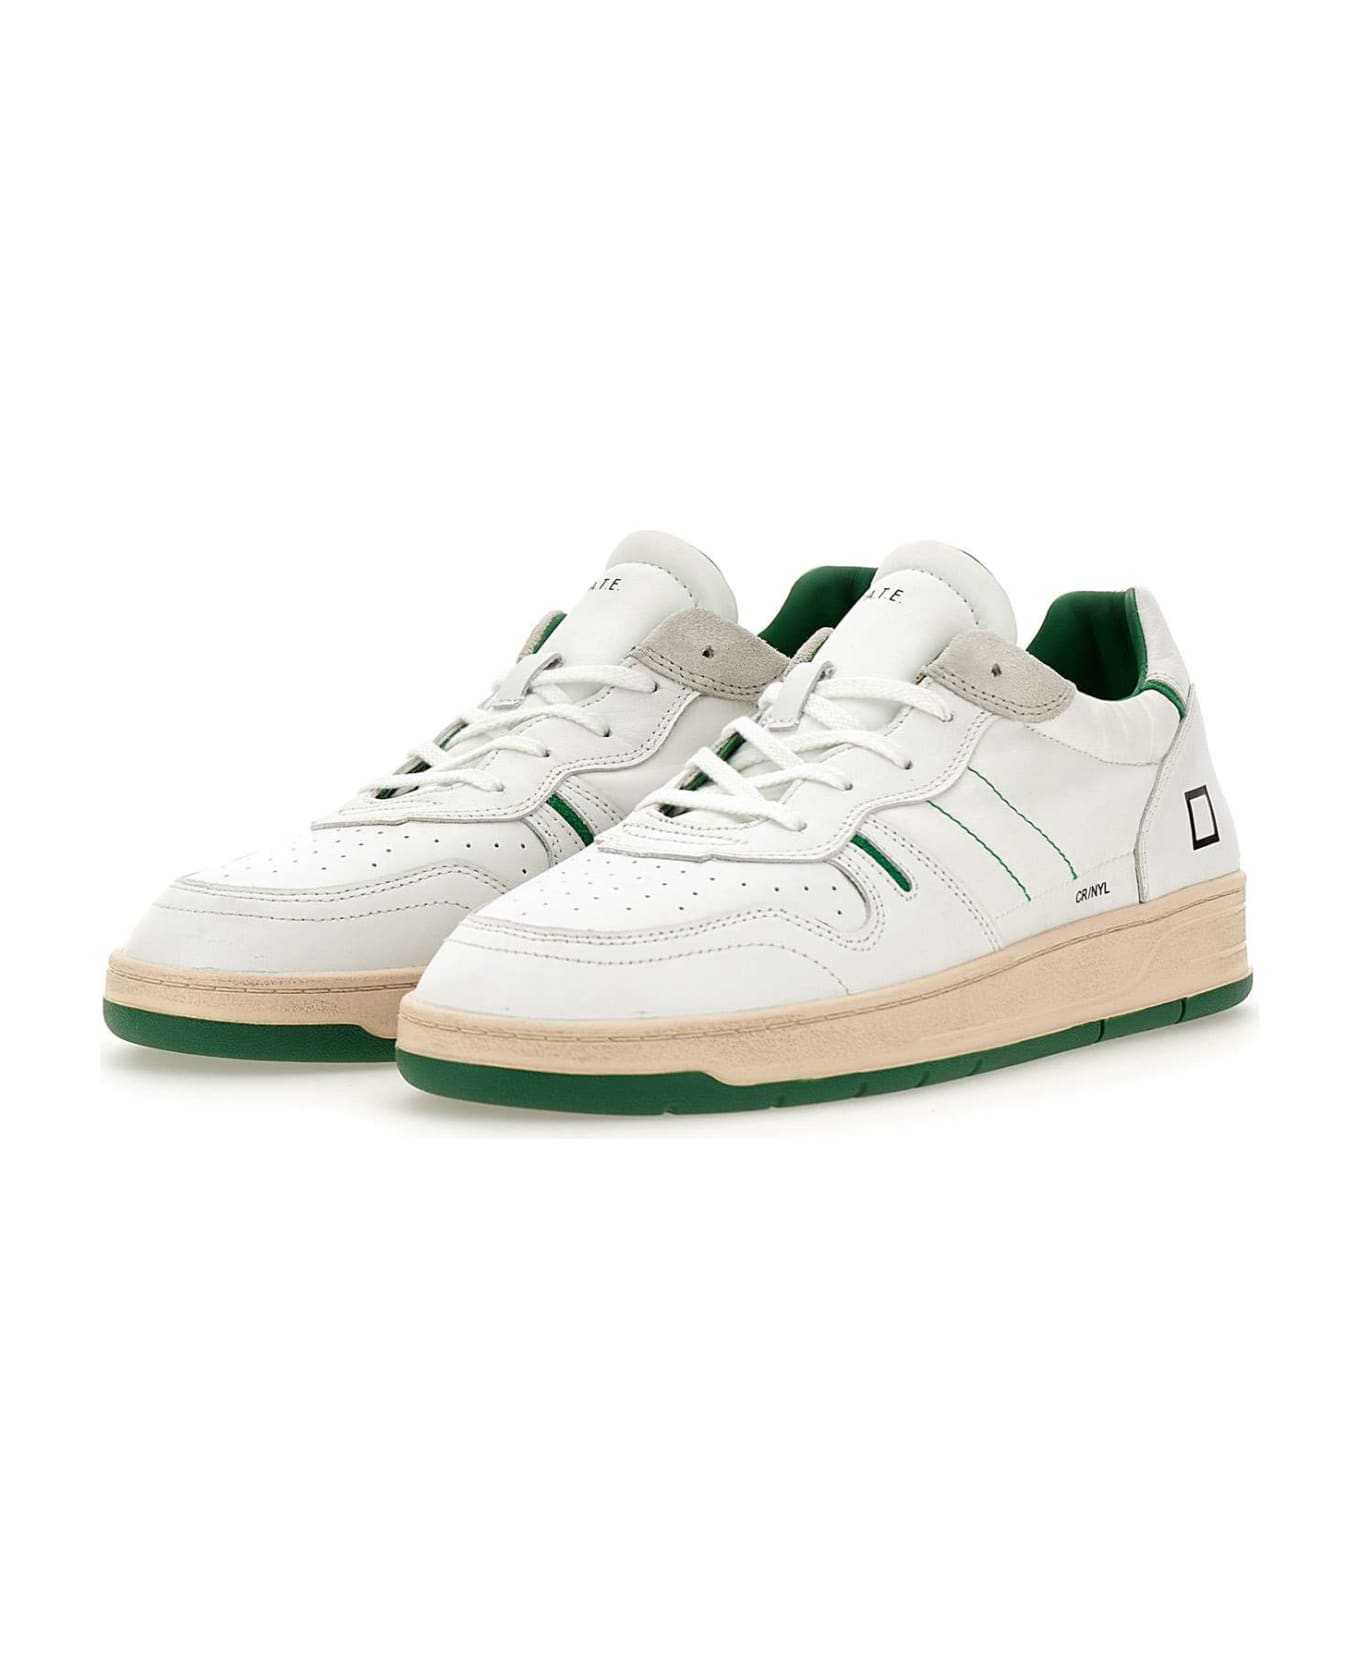 D.A.T.E. "court 2.0" Sneakers - WHITE-GREEN スニーカー